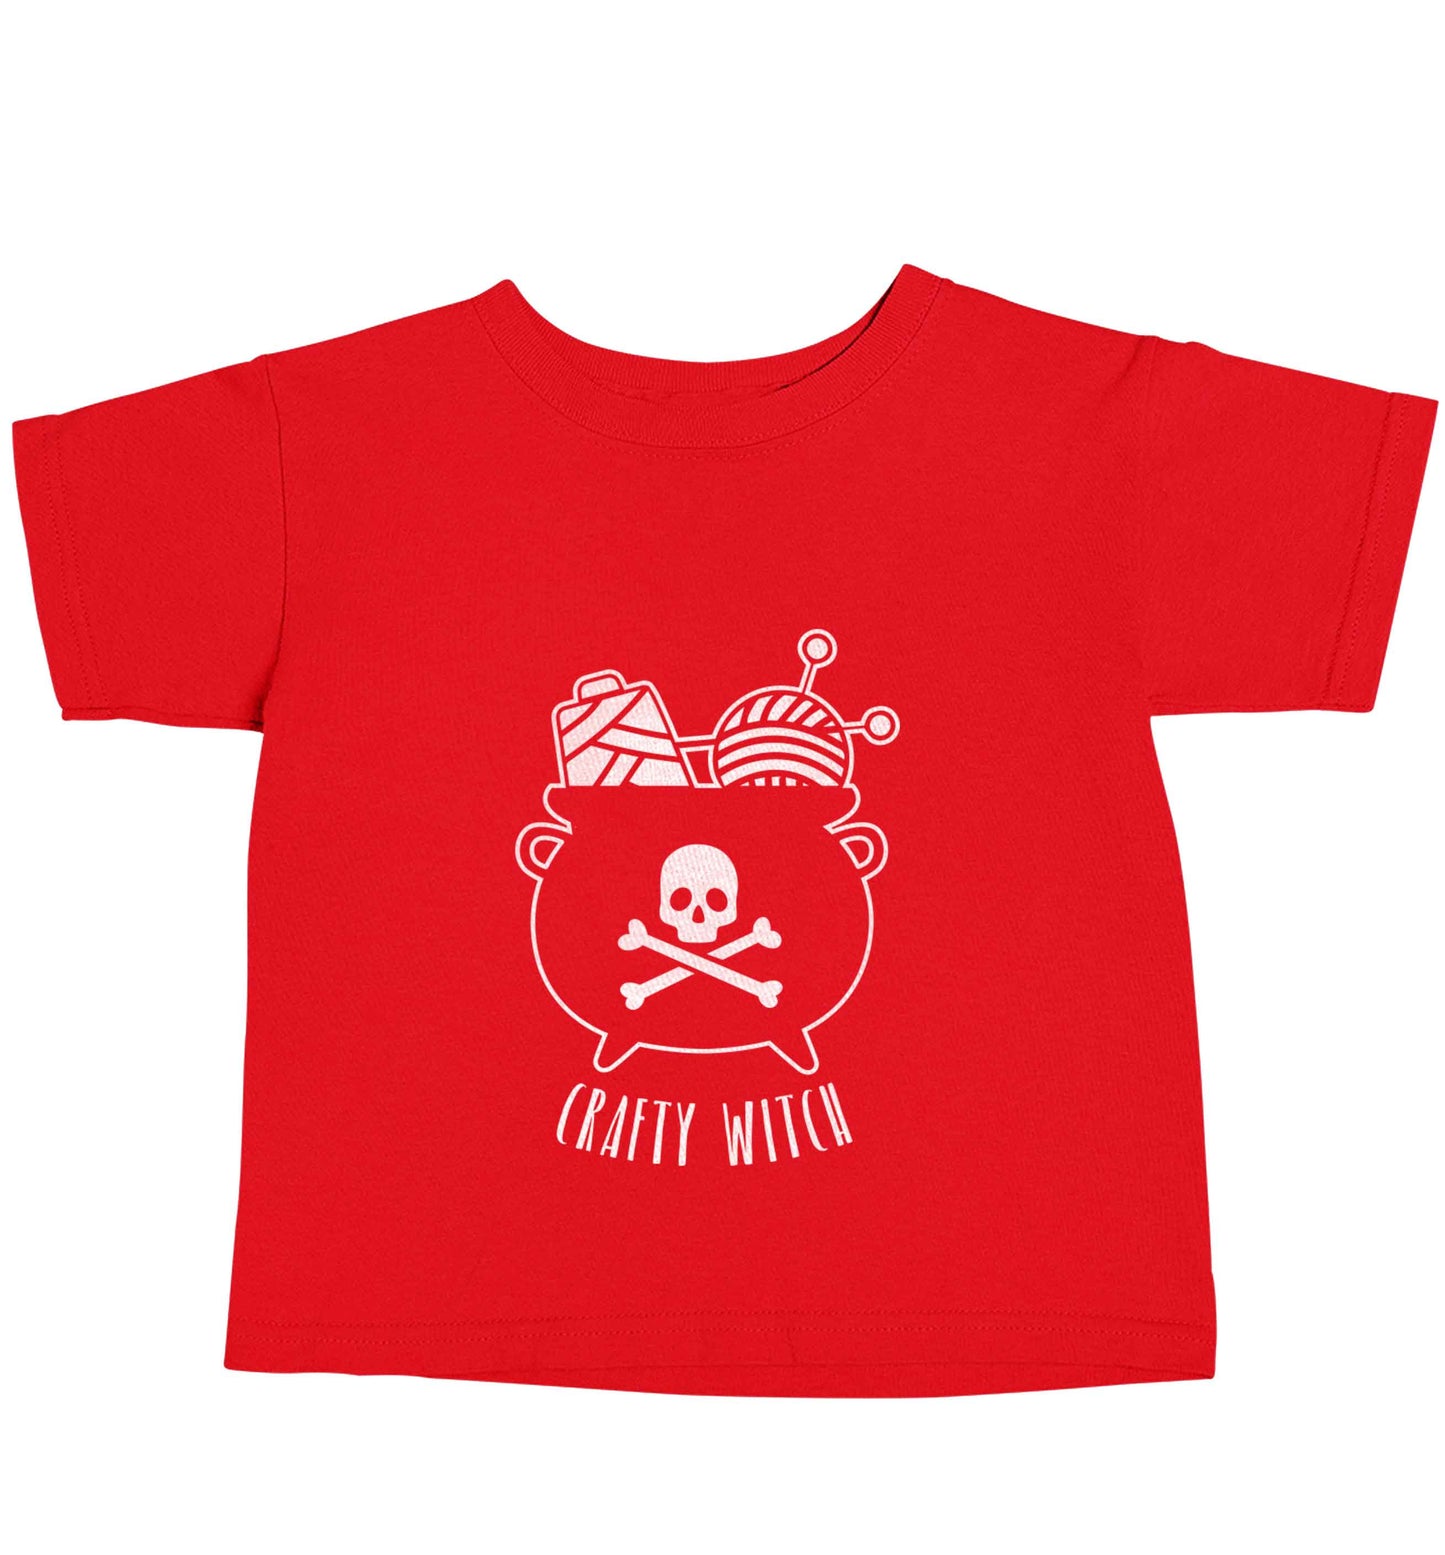 Crafty witch red baby toddler Tshirt 2 Years